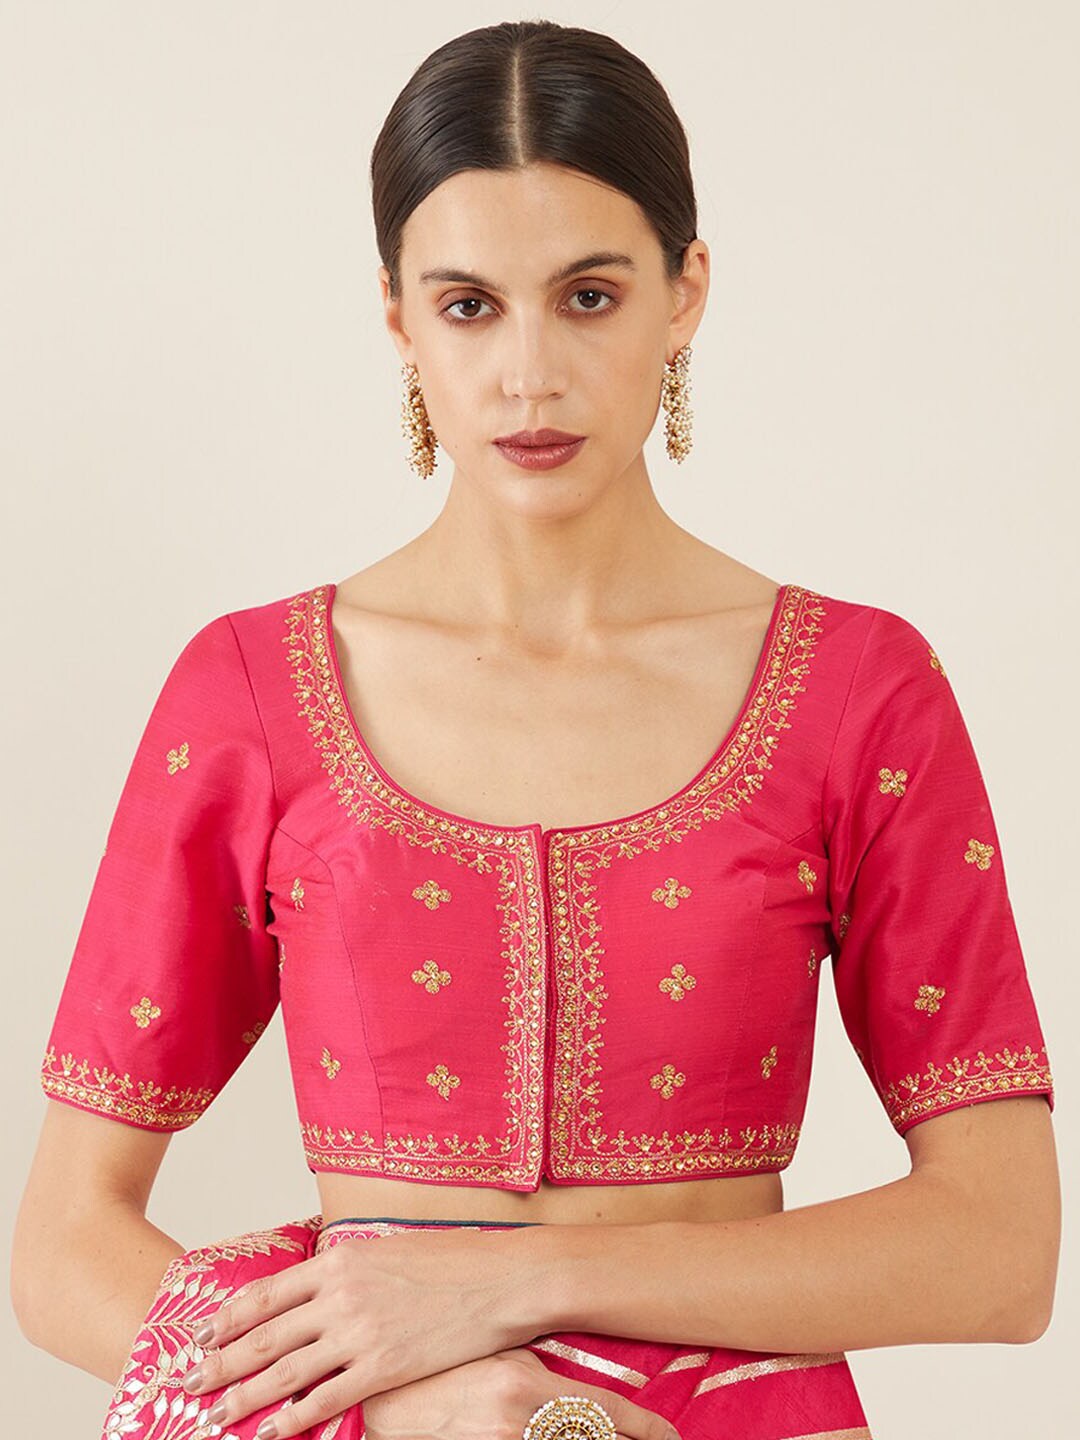 Soch Women Pink & Gold Embroidered Saree Blouse Price in India